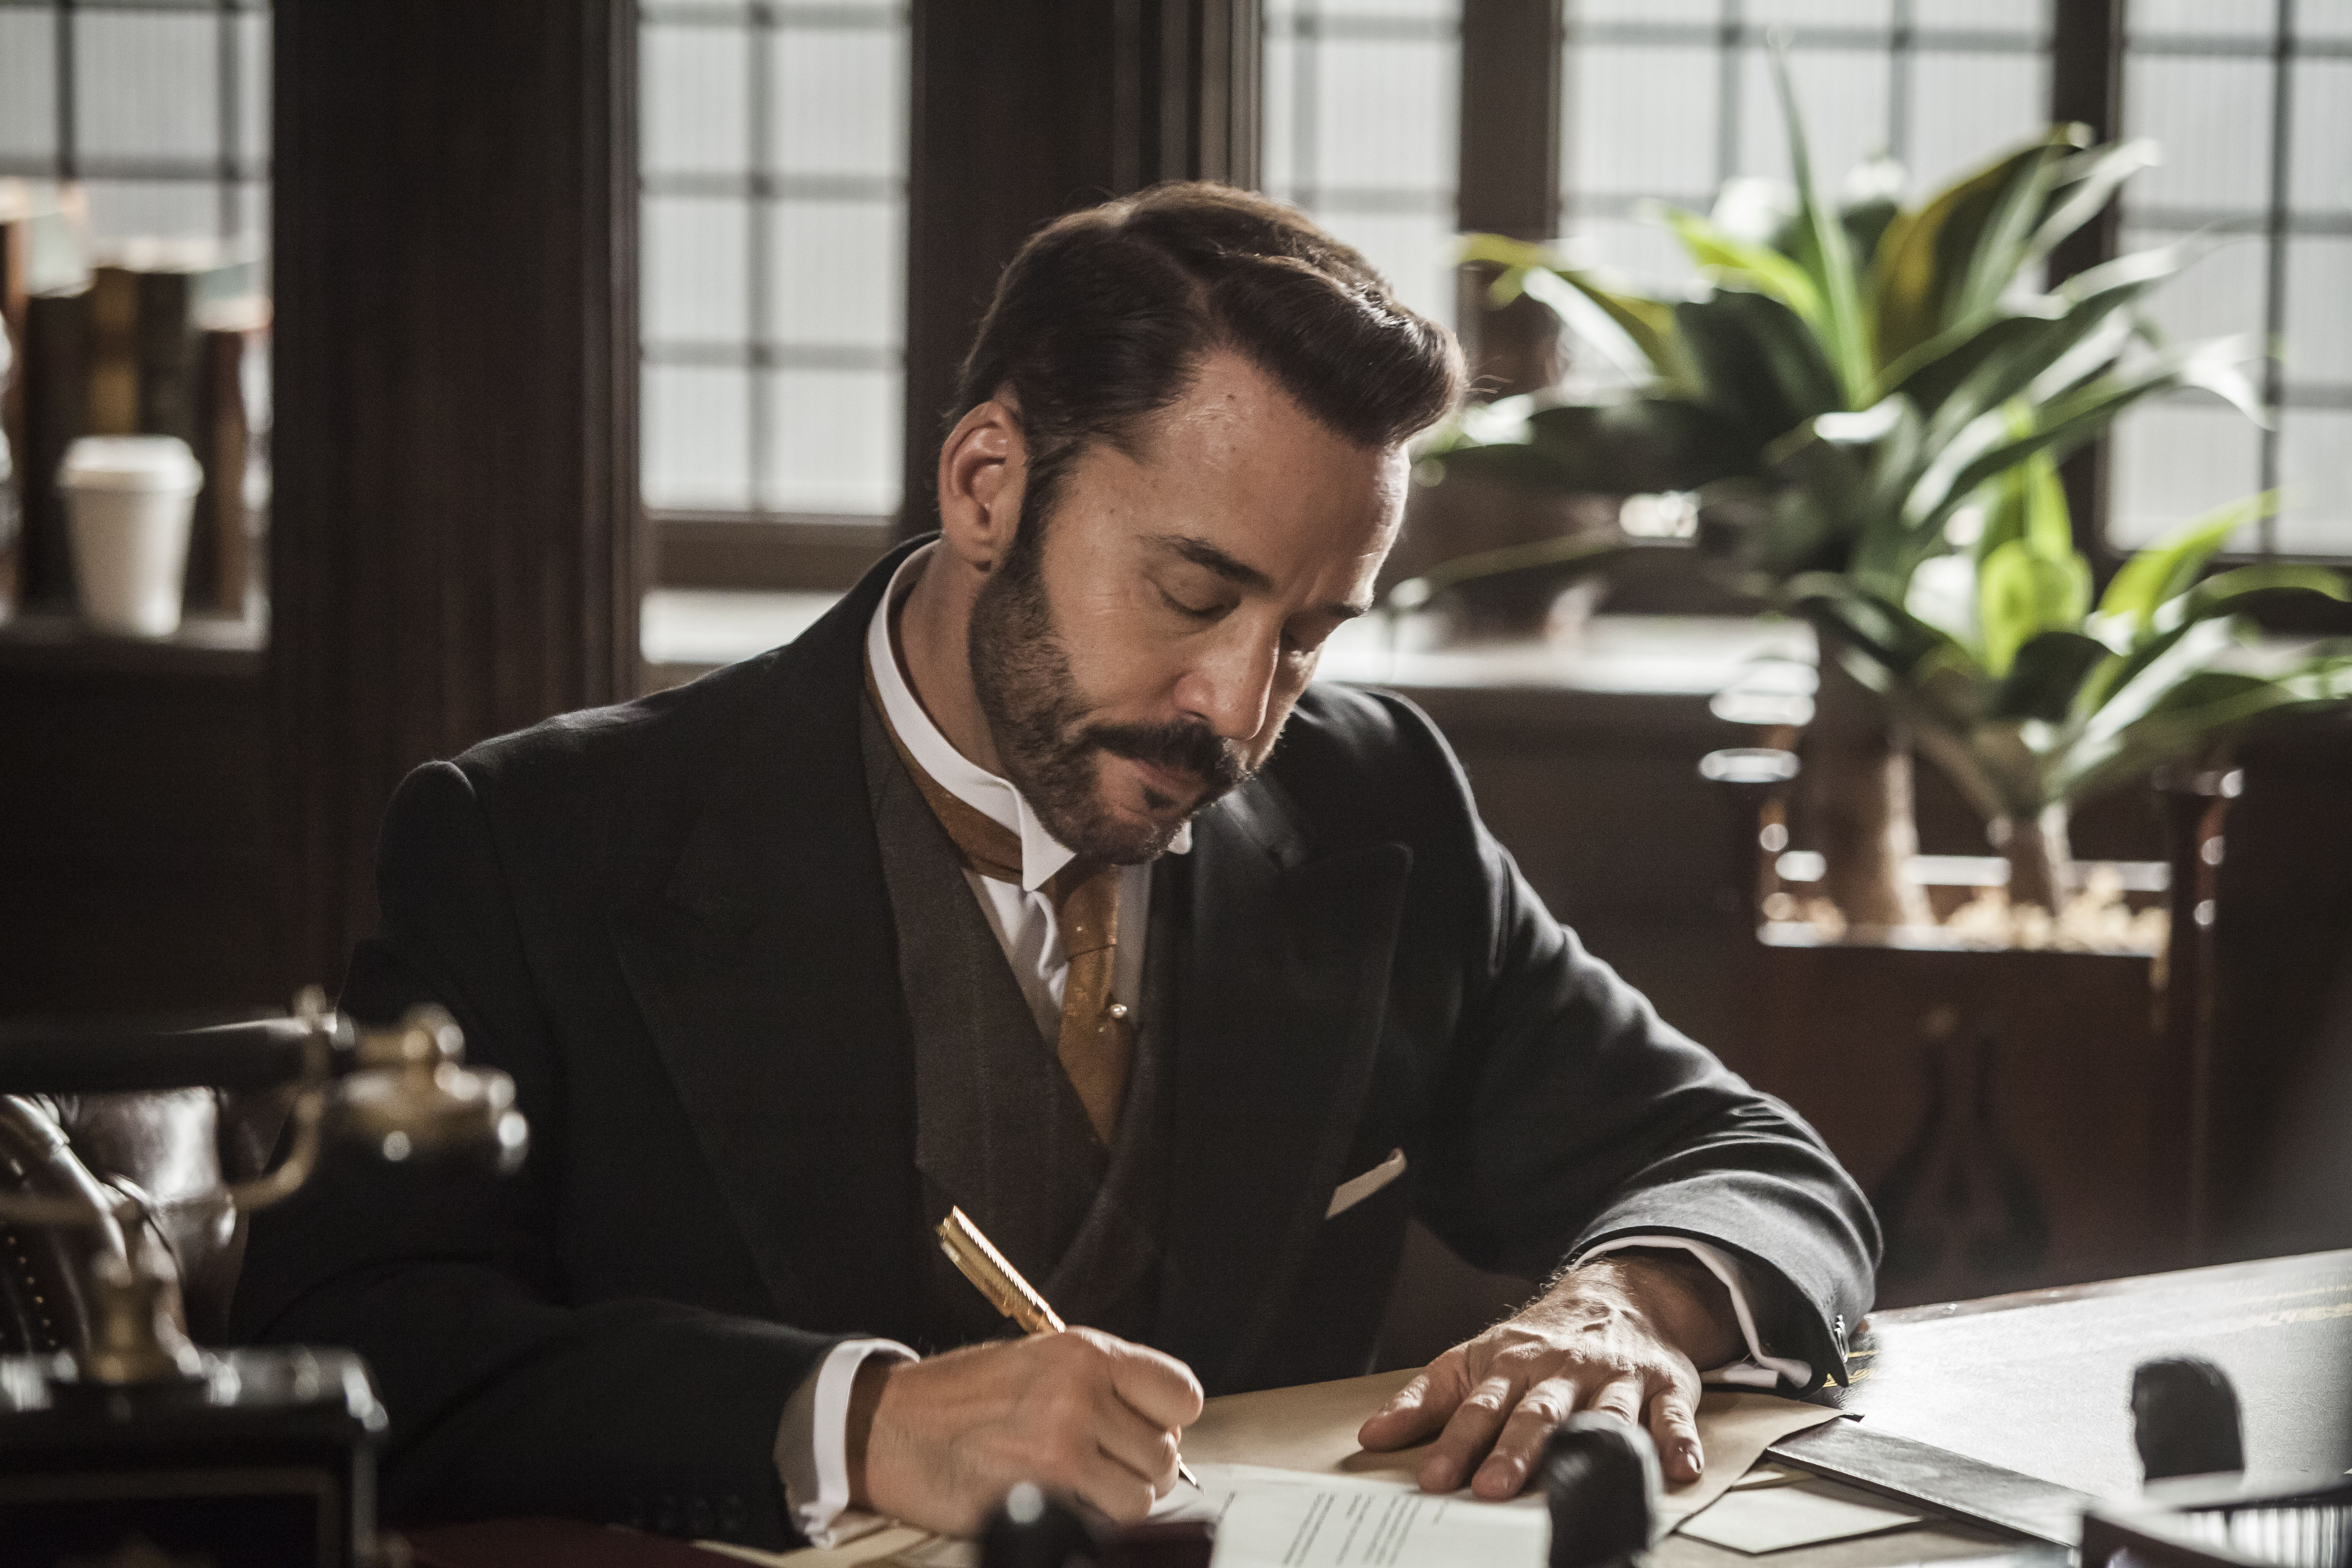 Harry Selfridge, probably making poor choices. (Photo: Courtesy of John Rogers/ITV Studios for MASTERPIECE0